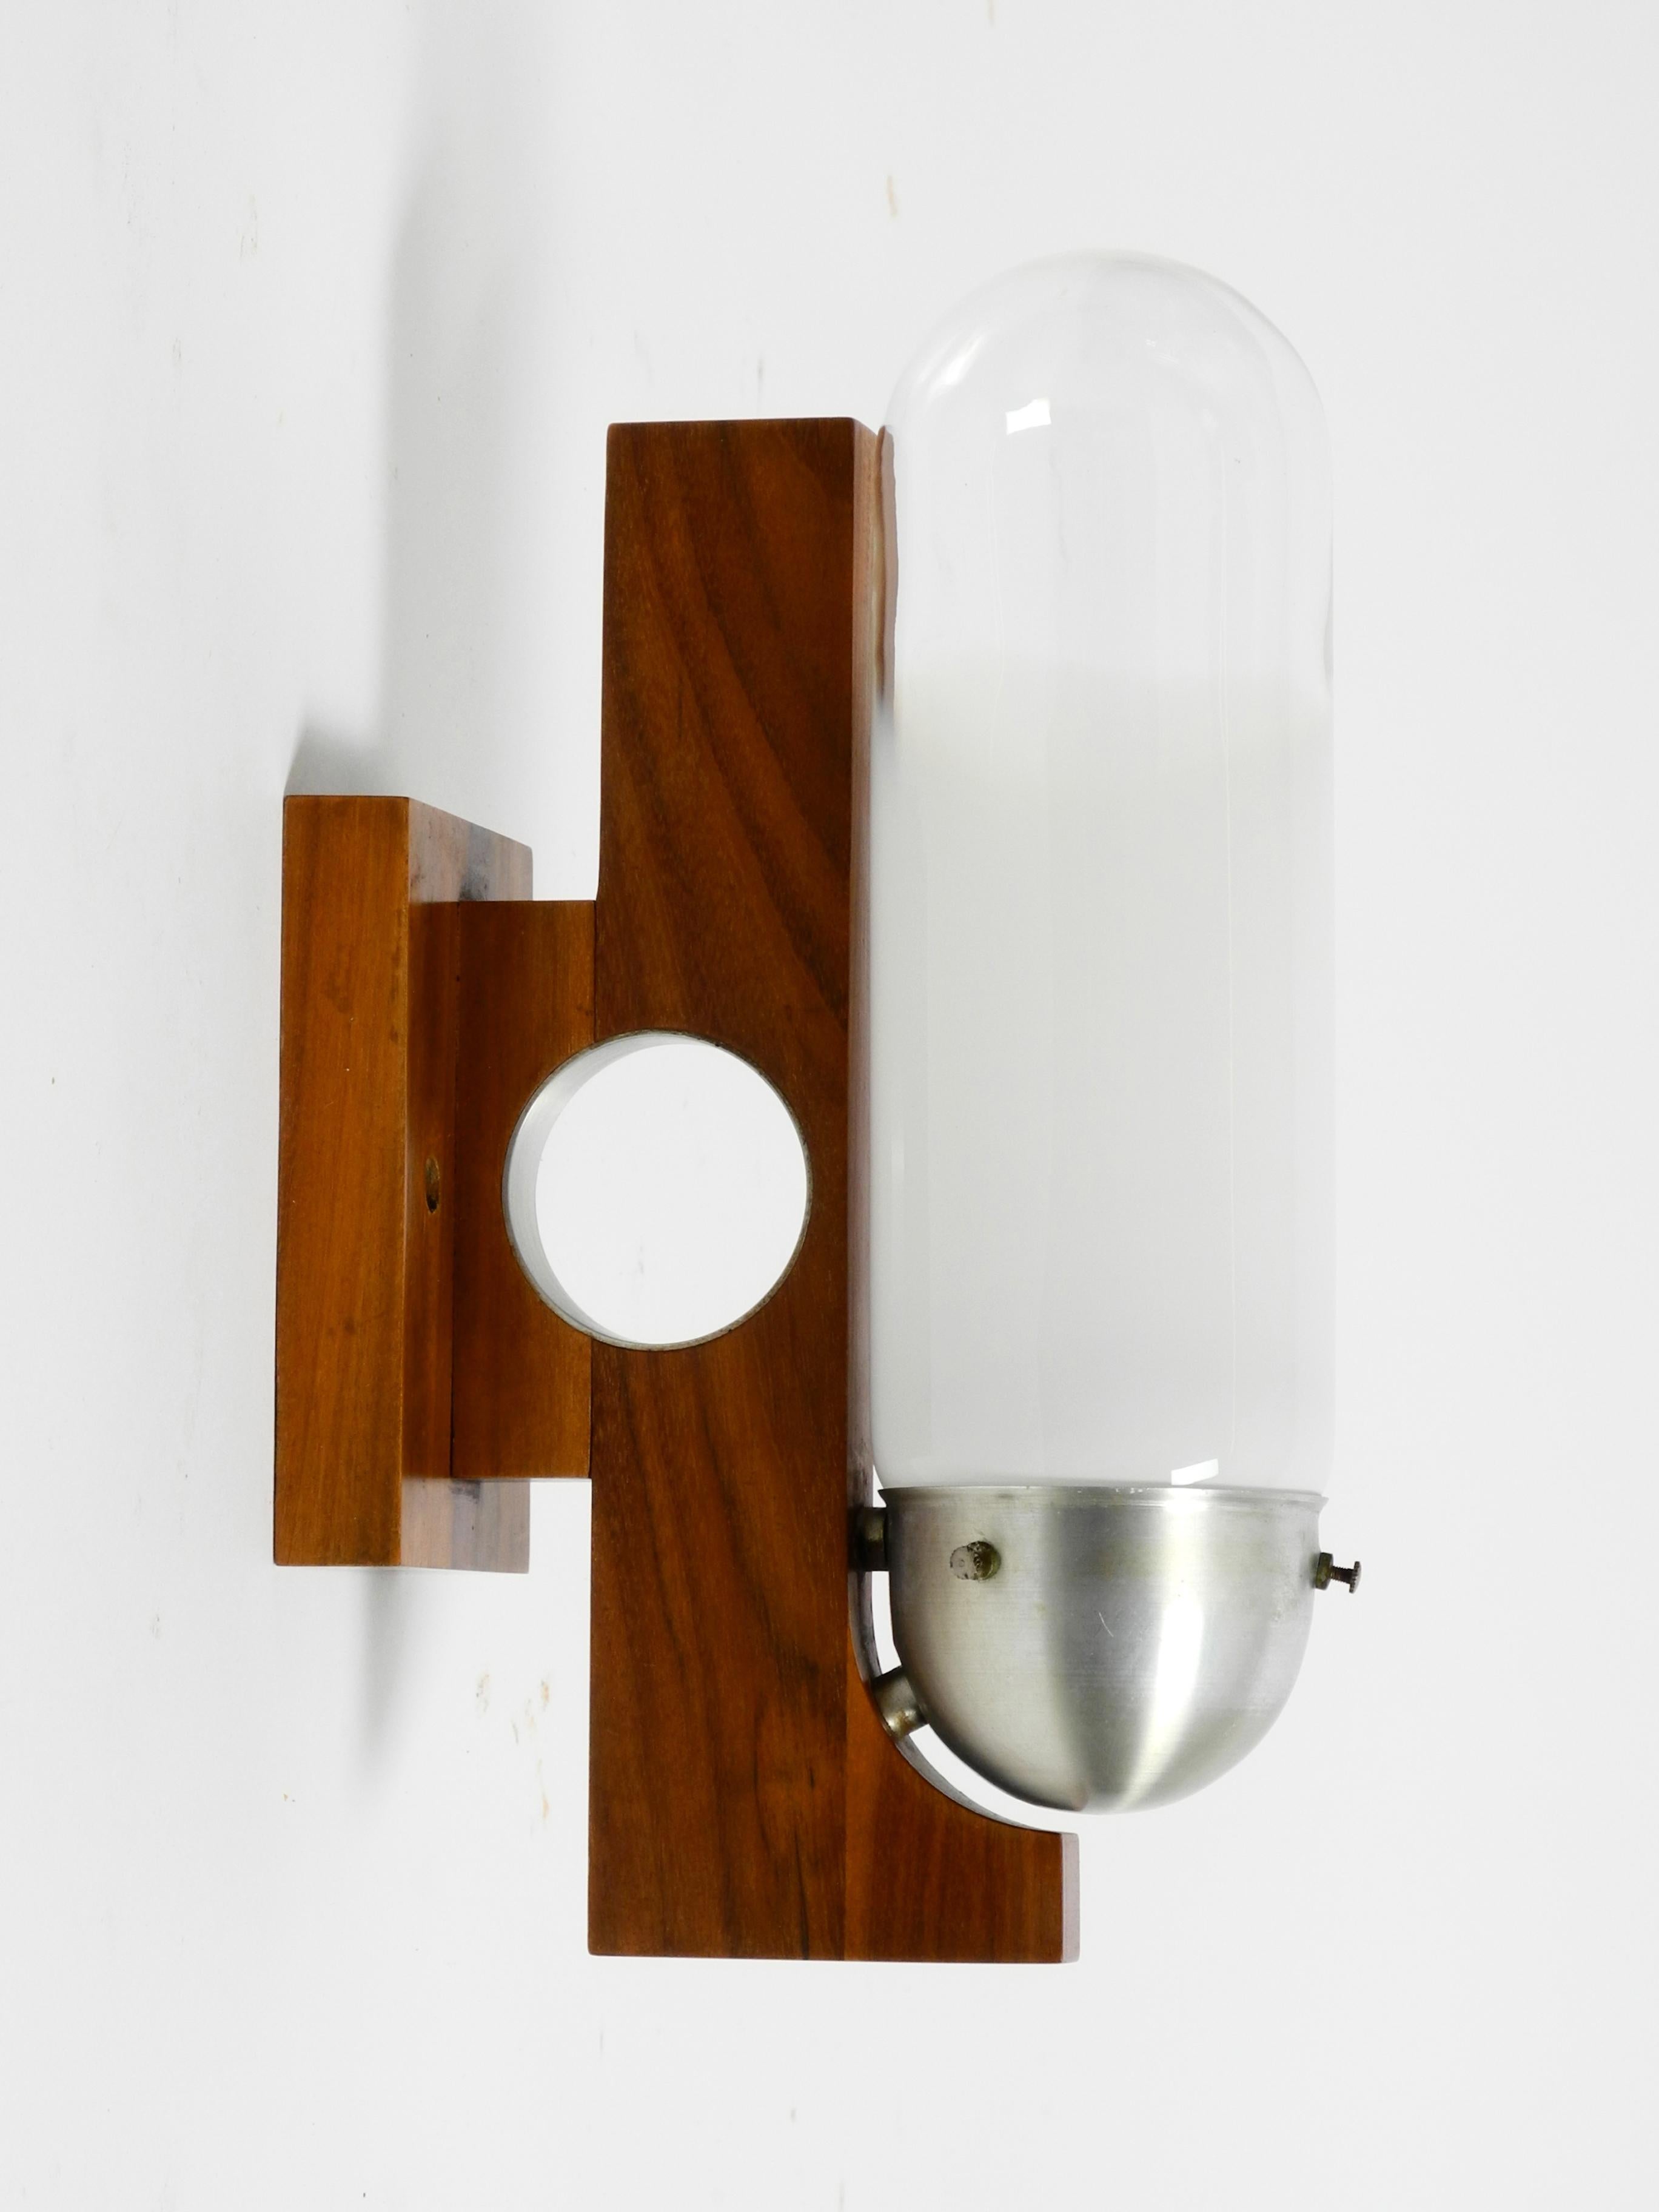 Rare Mid-Century Modern Wood Wall Lamp with Glass Shade in Art Deco Design  4